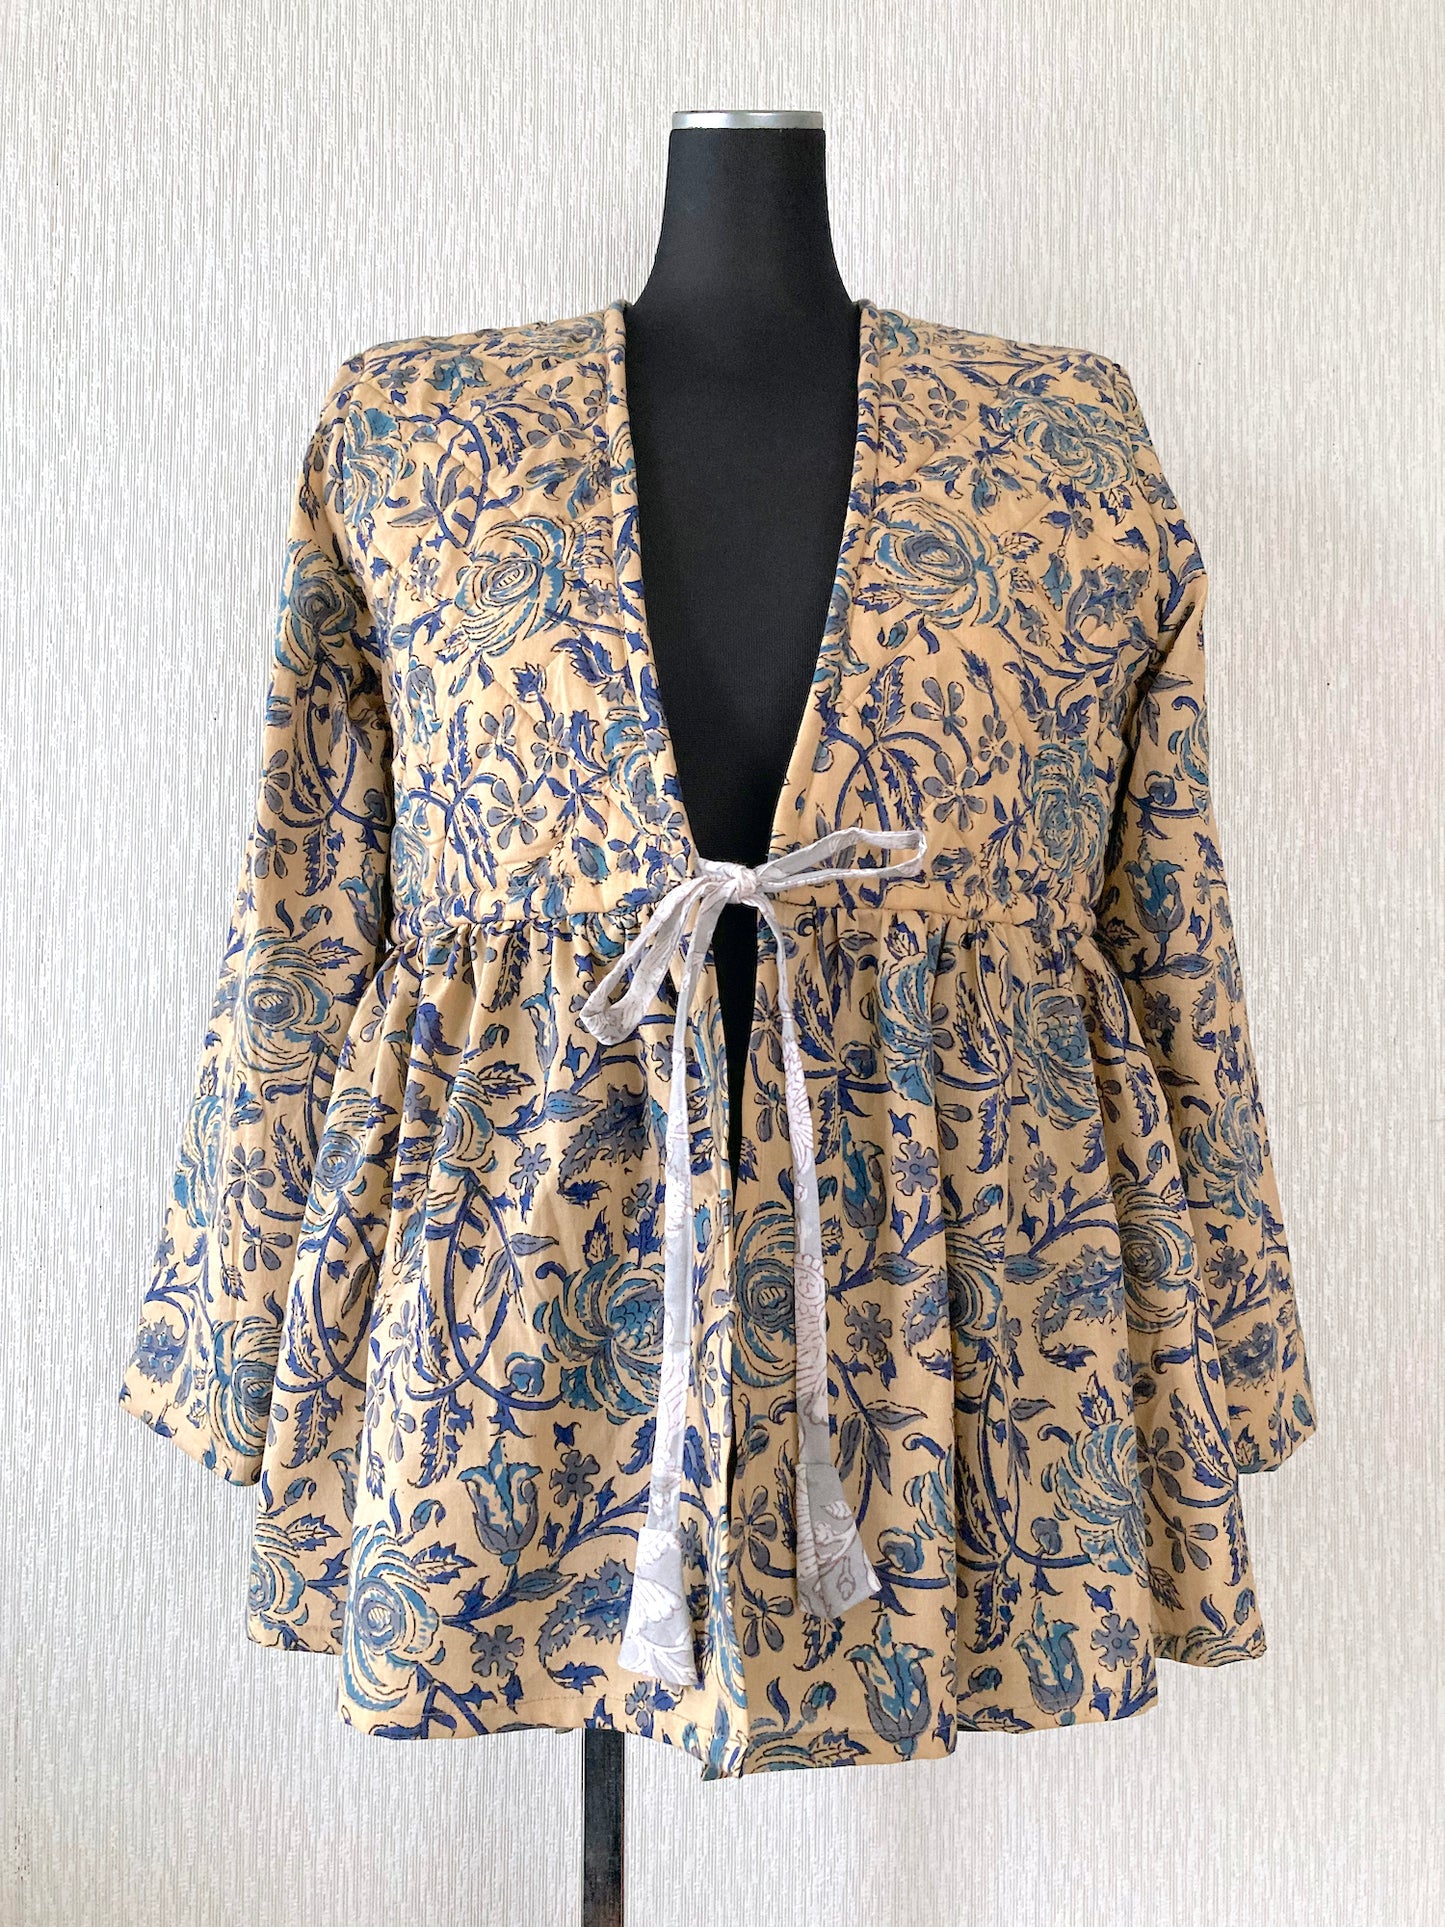 Hand Block Print Quilted Cardigan Jacket Blouse